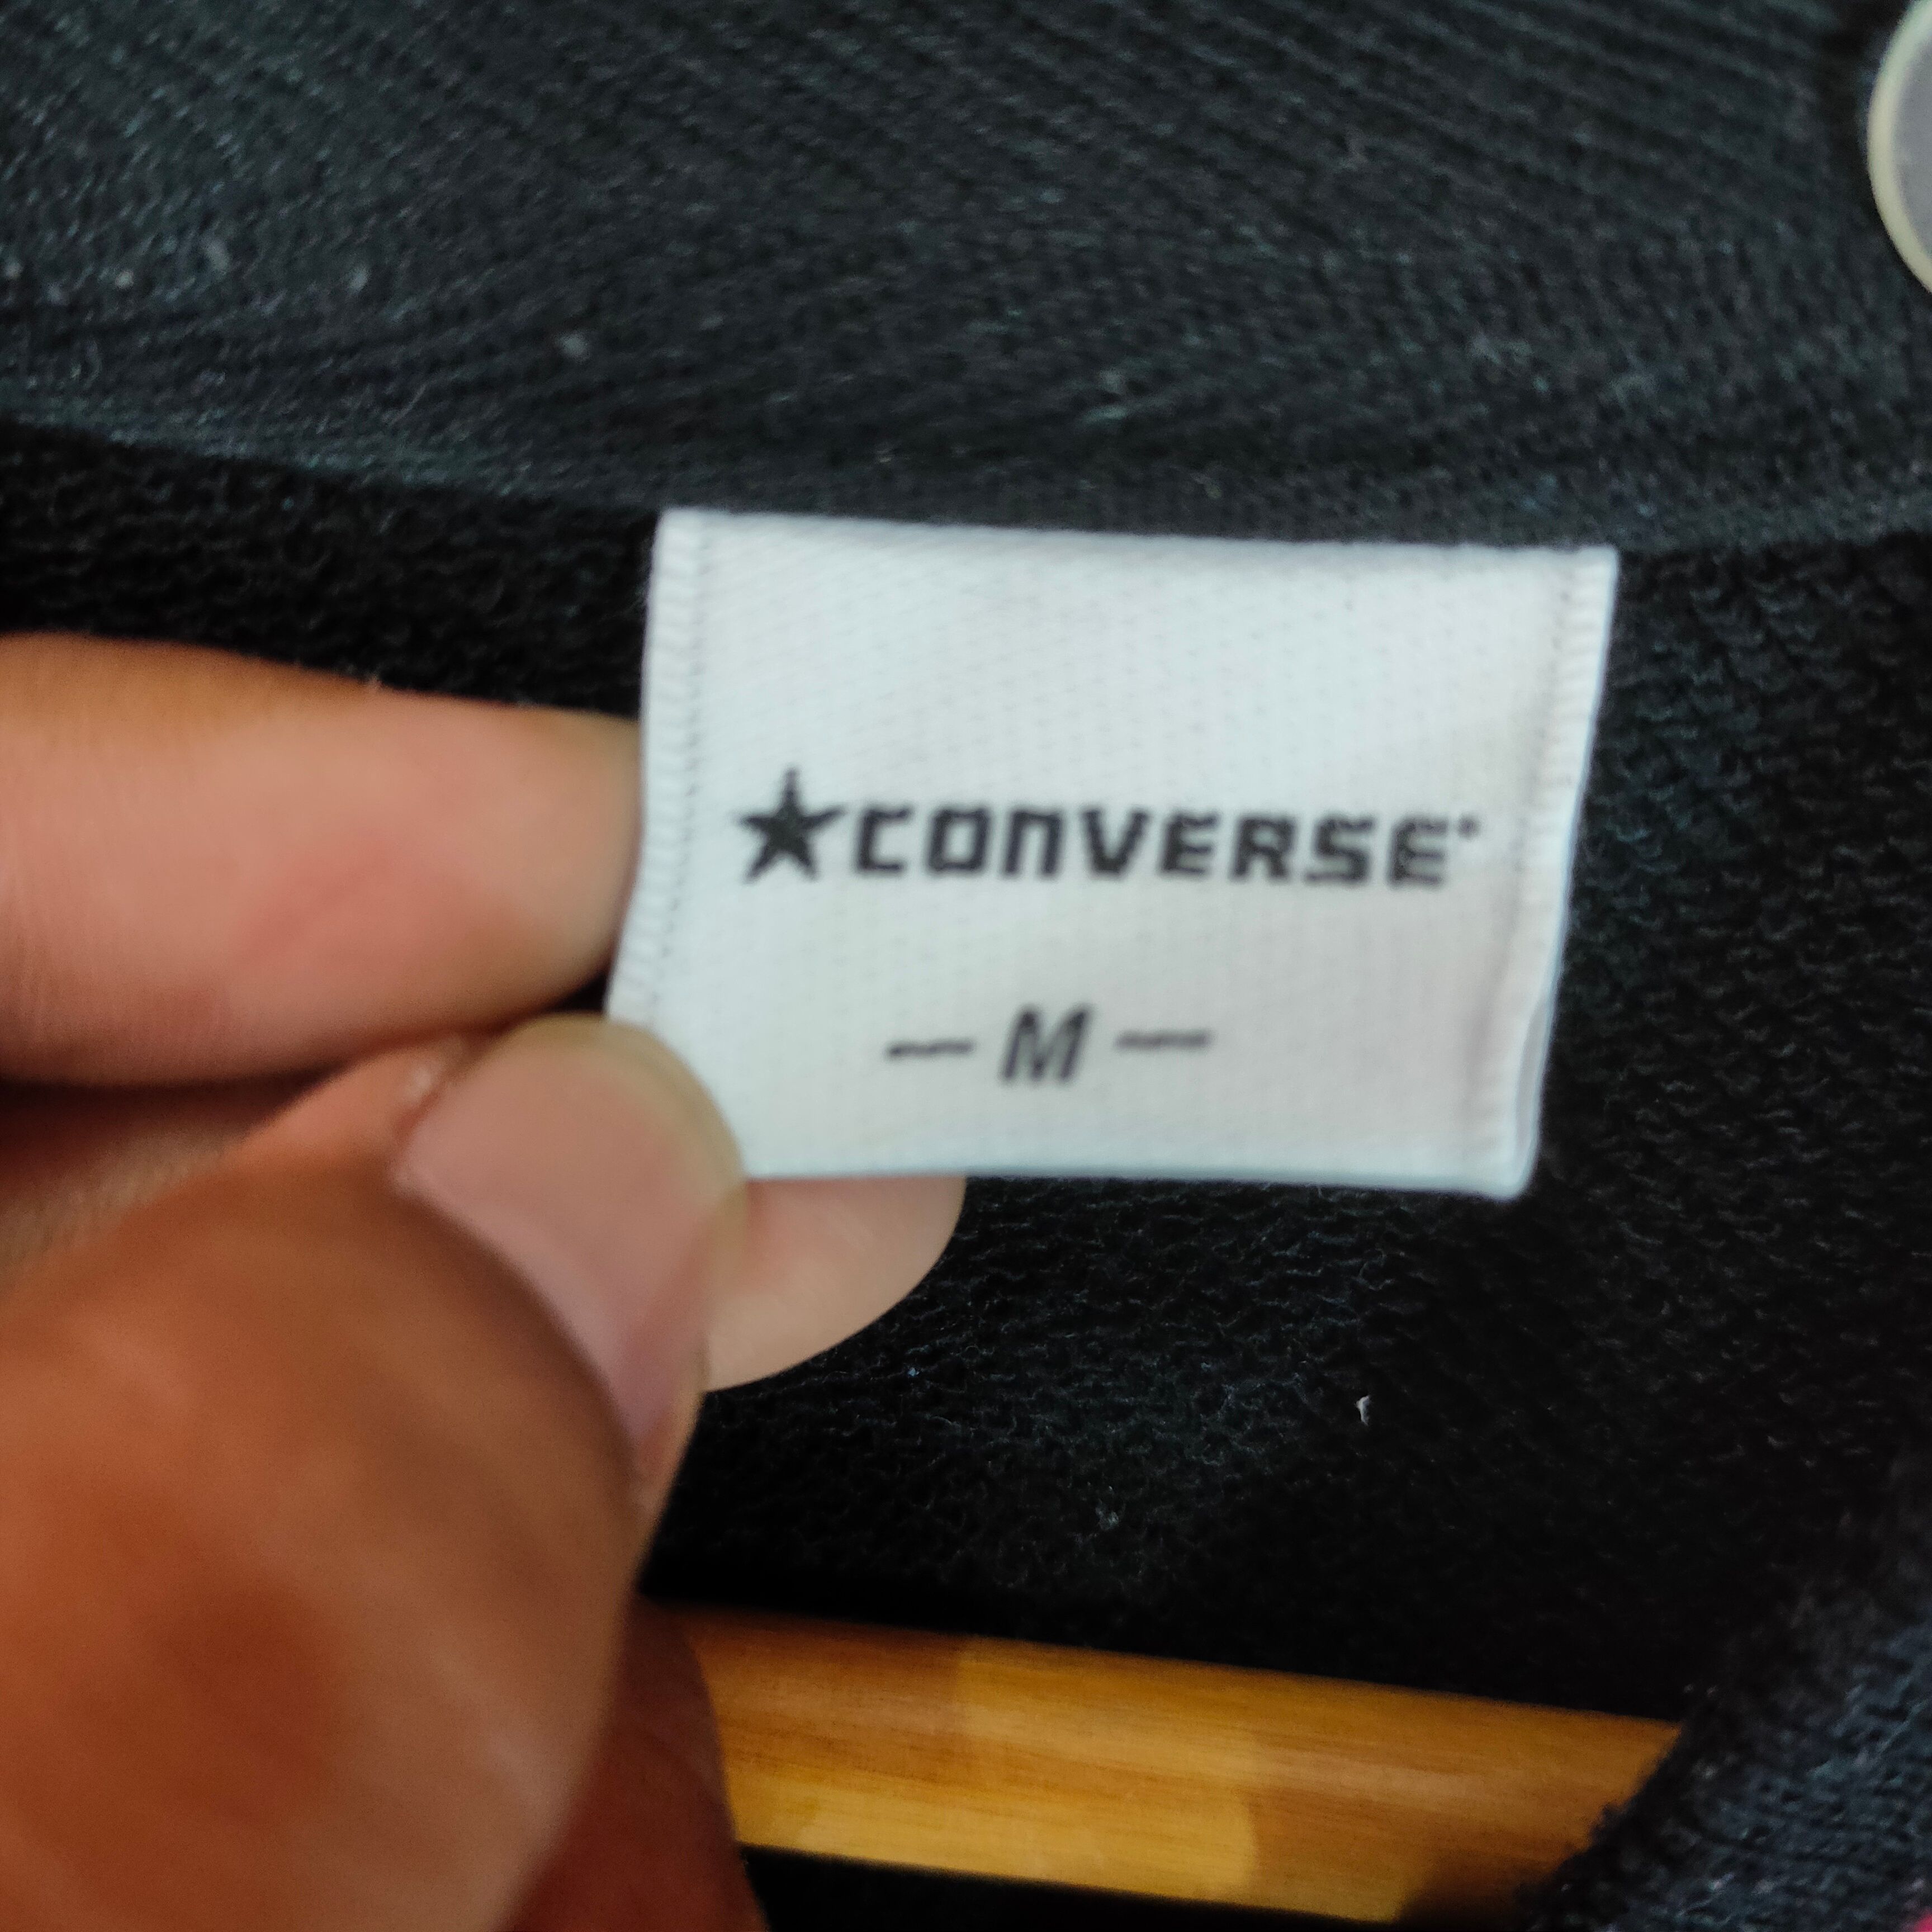 Vintage CONVERSE Embroidery Logo Full Button M Size Varsity - 4